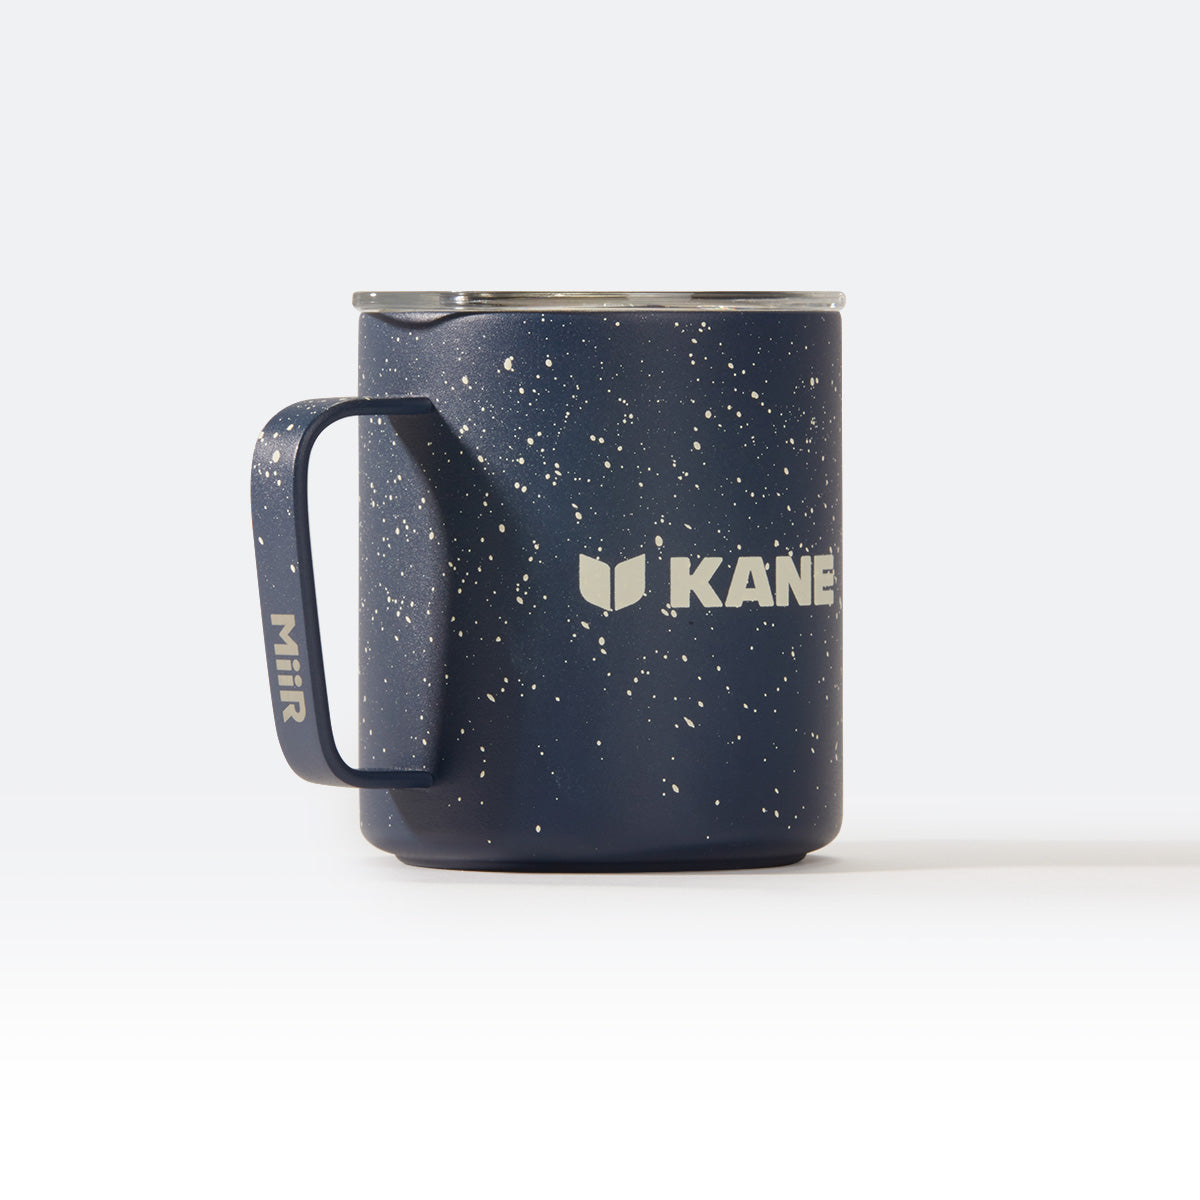 Load image into Gallery viewer, kane-miir-cup
